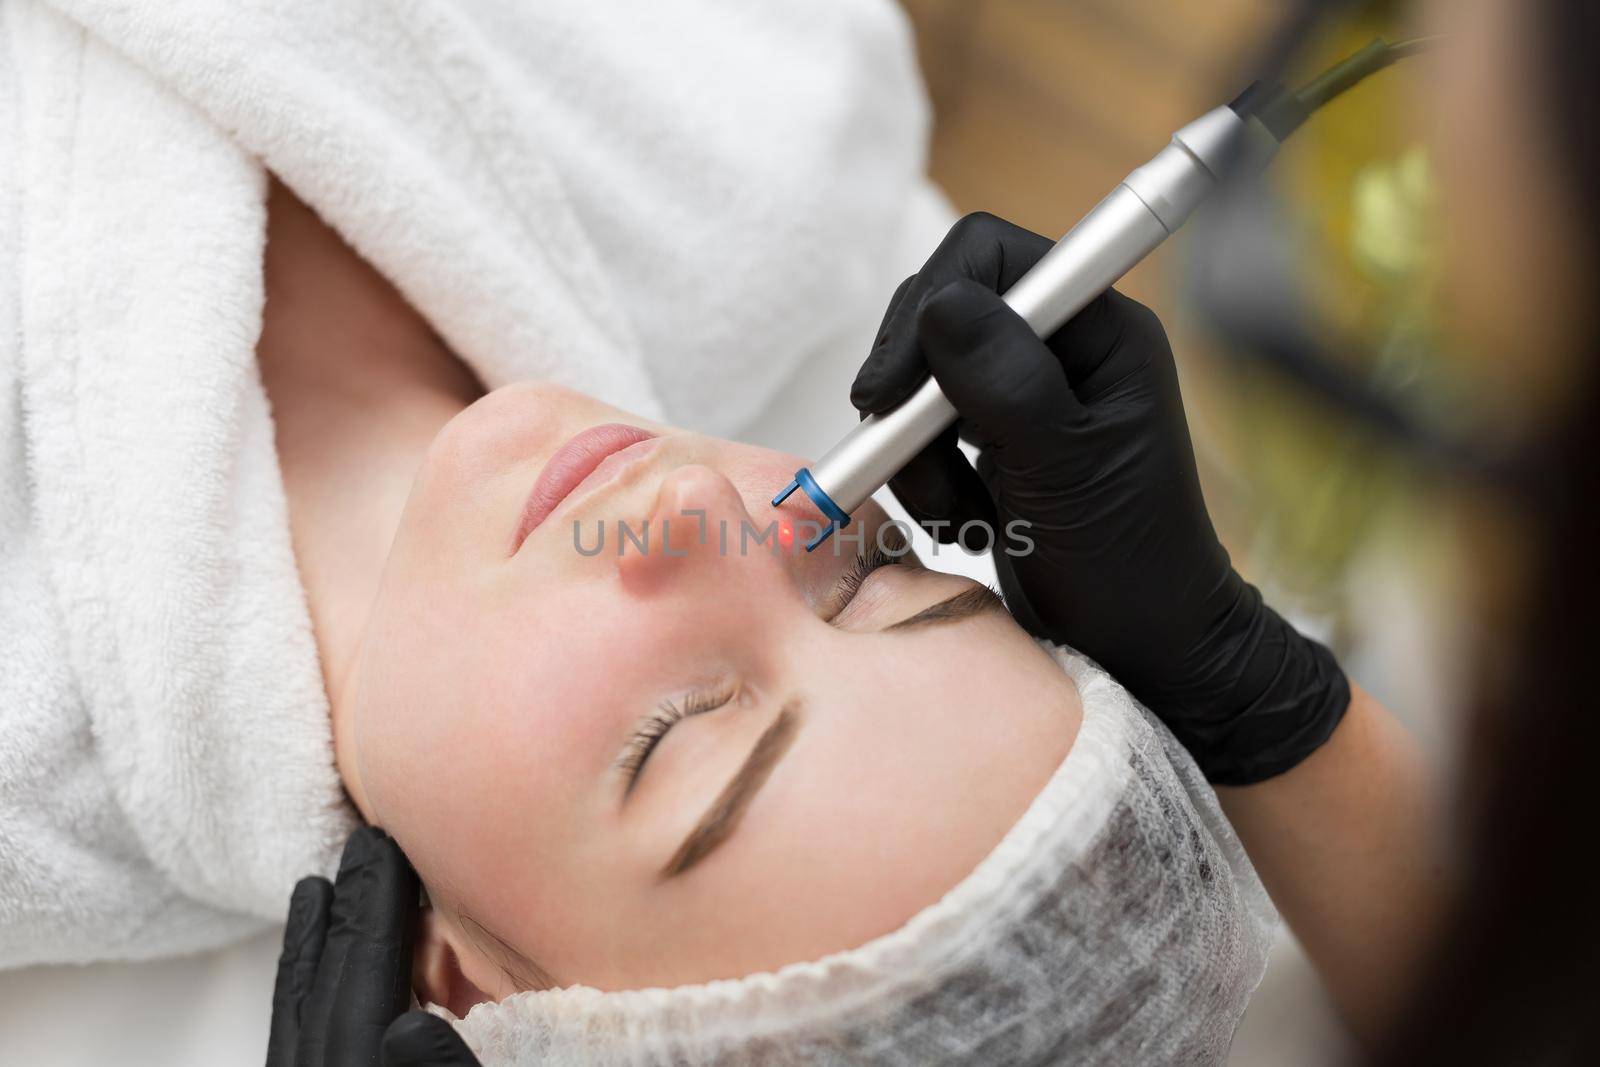 Close-up removal of blood vessels on the face of a diode laser in a cosmetic clinic. Therapist beautician makes a laser treatment to young woman's face at beauty SPA clinic